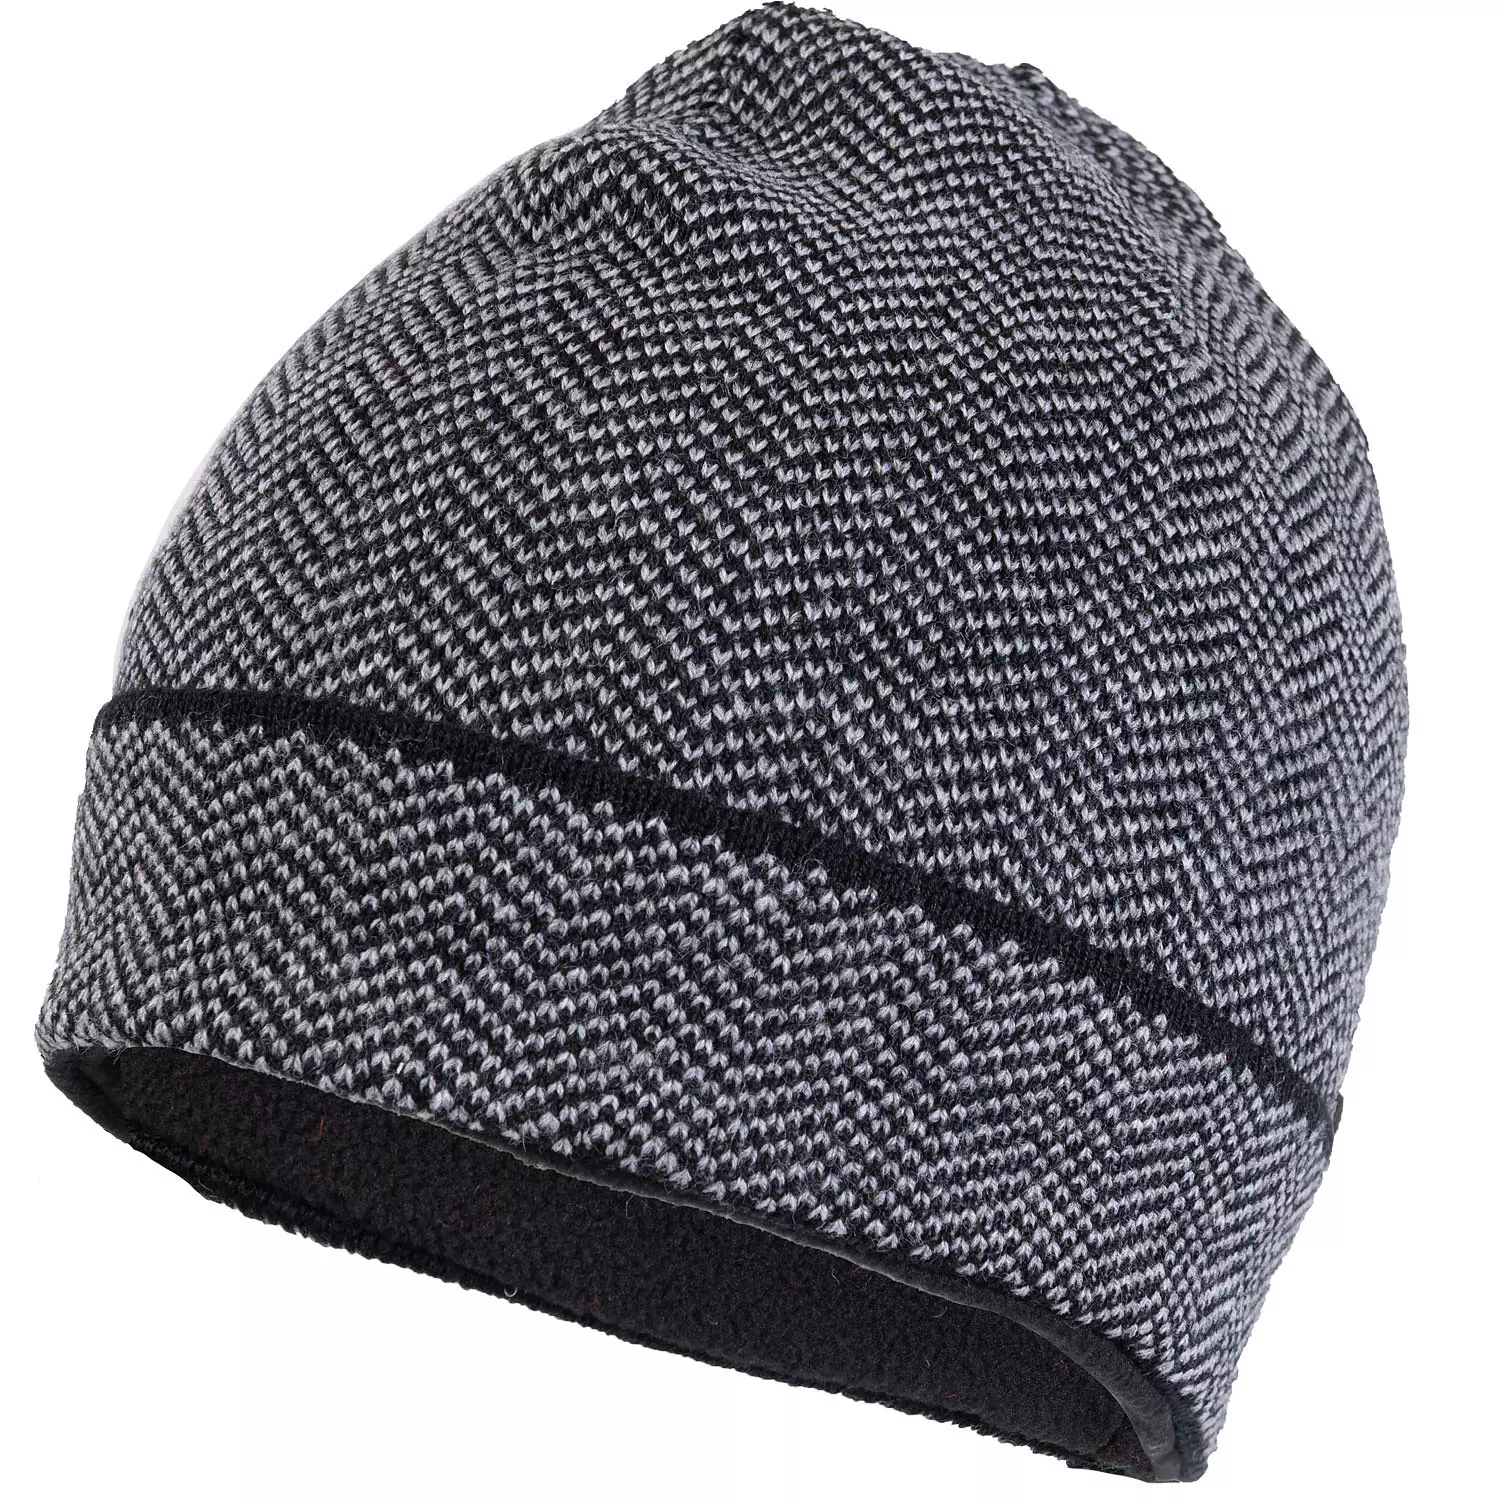 Herringbone patterned tuque with fleece lined headband